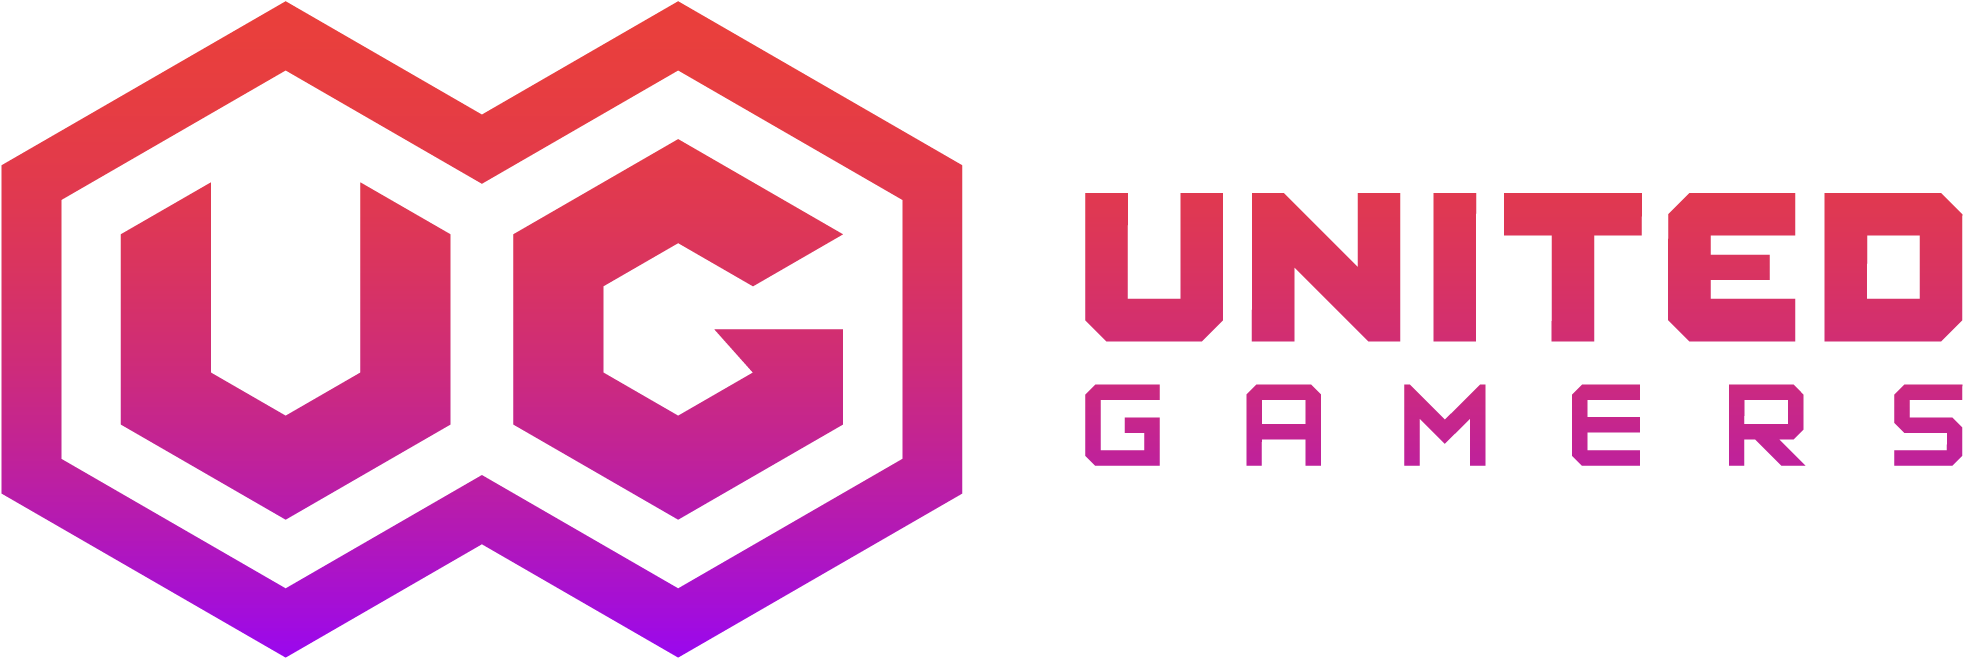 United Gamers DAO